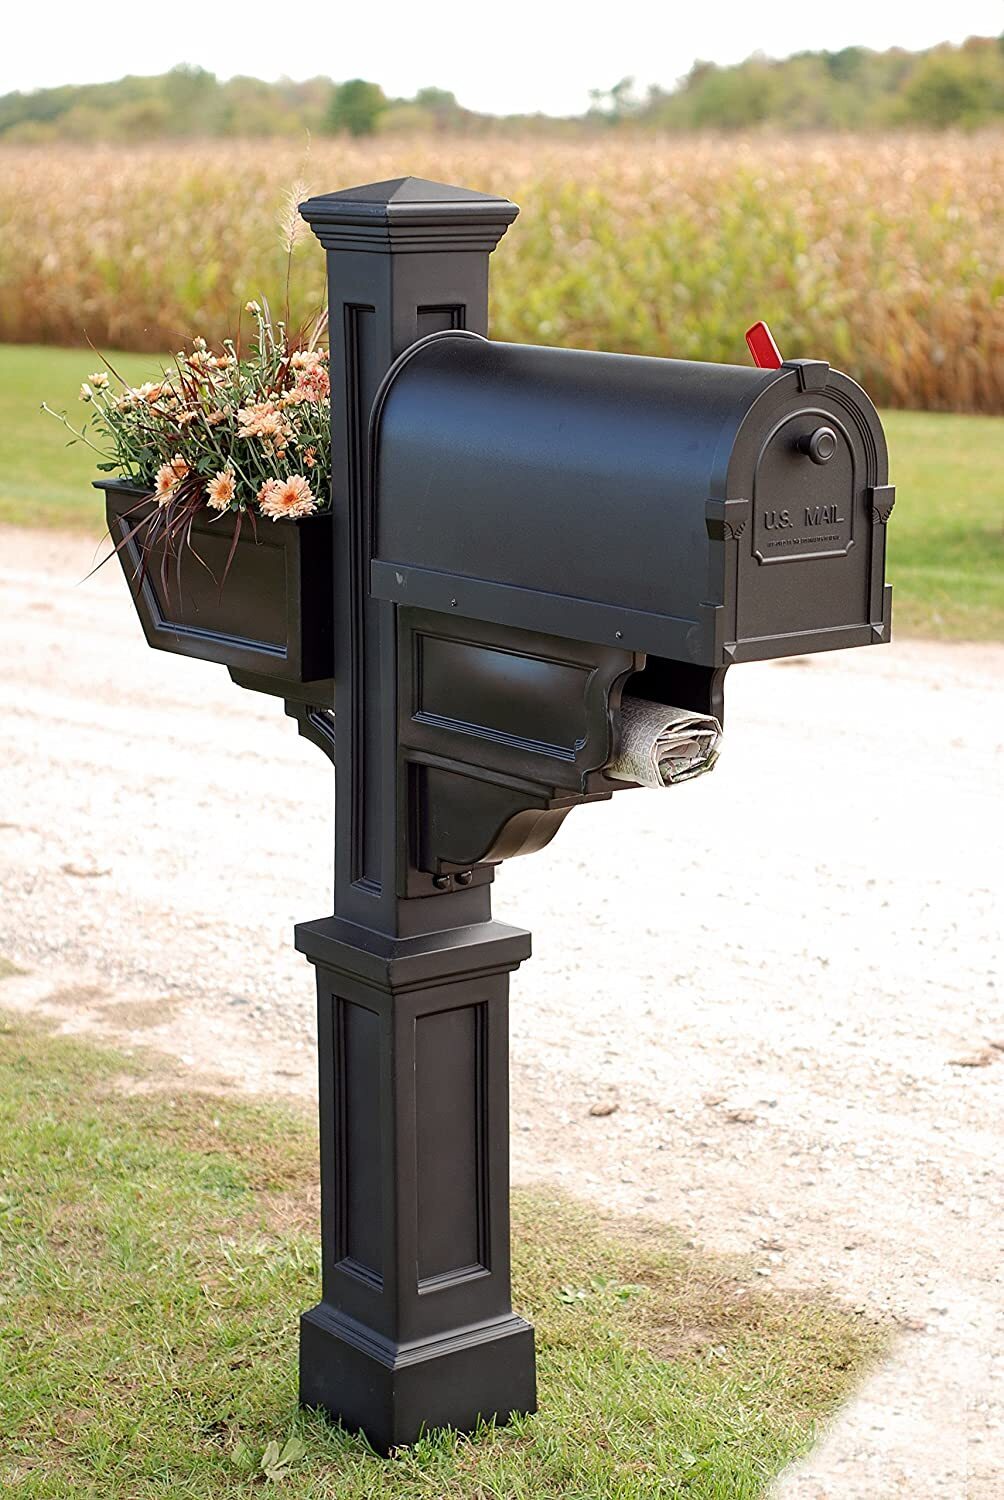 White or black iron mailbox post with room for flowers